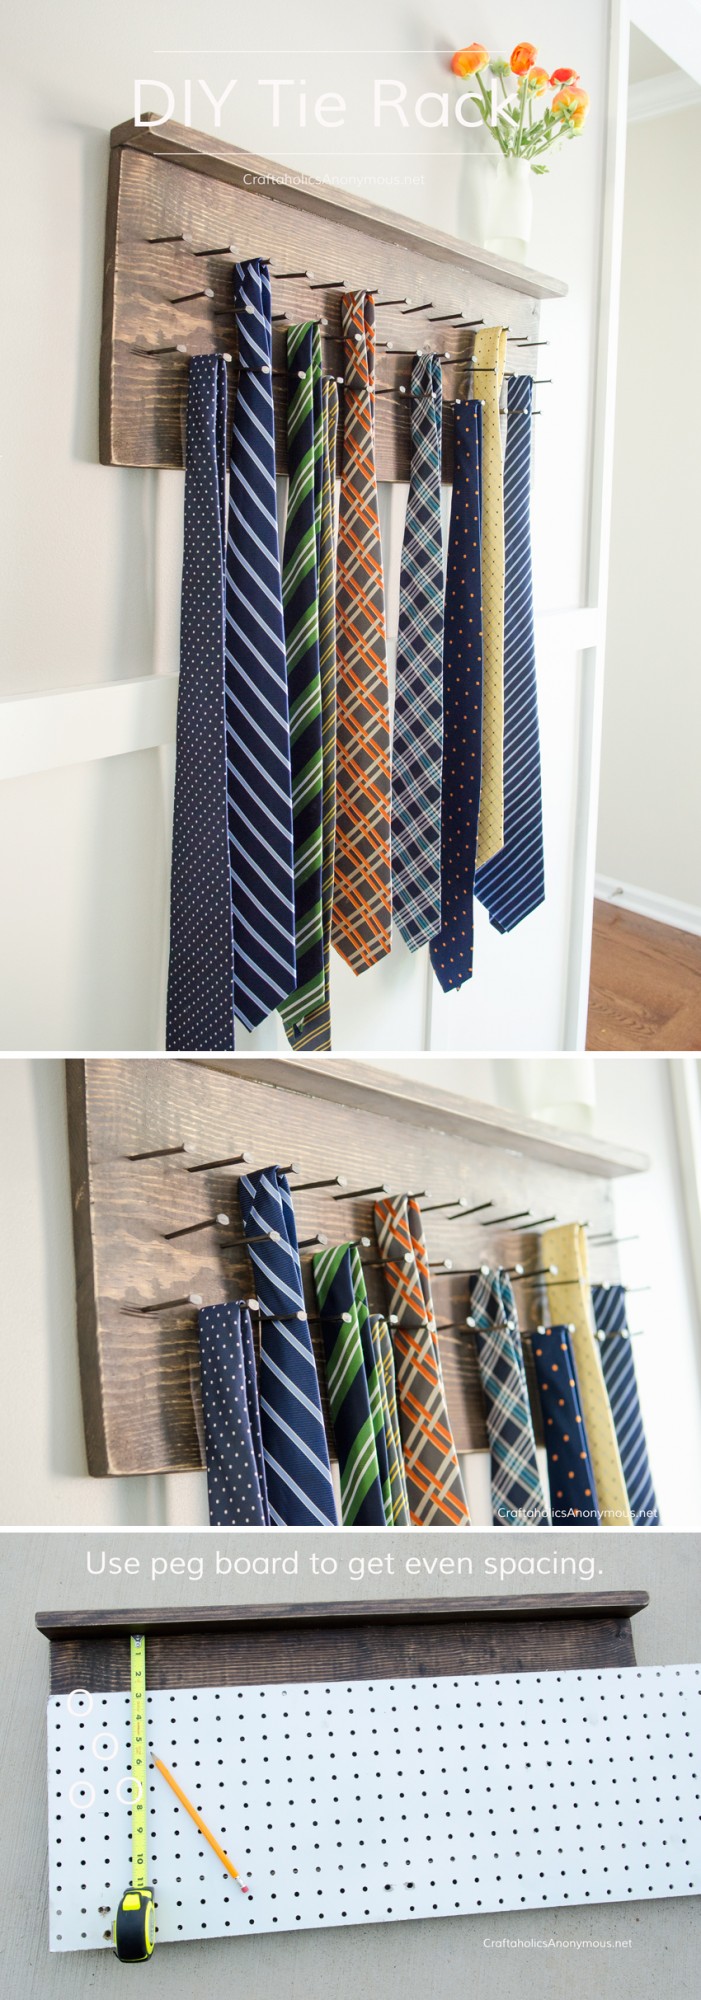 Rustic Wood Tie Rack DIY tutorial || Would make an awesome Father's Day gift idea!